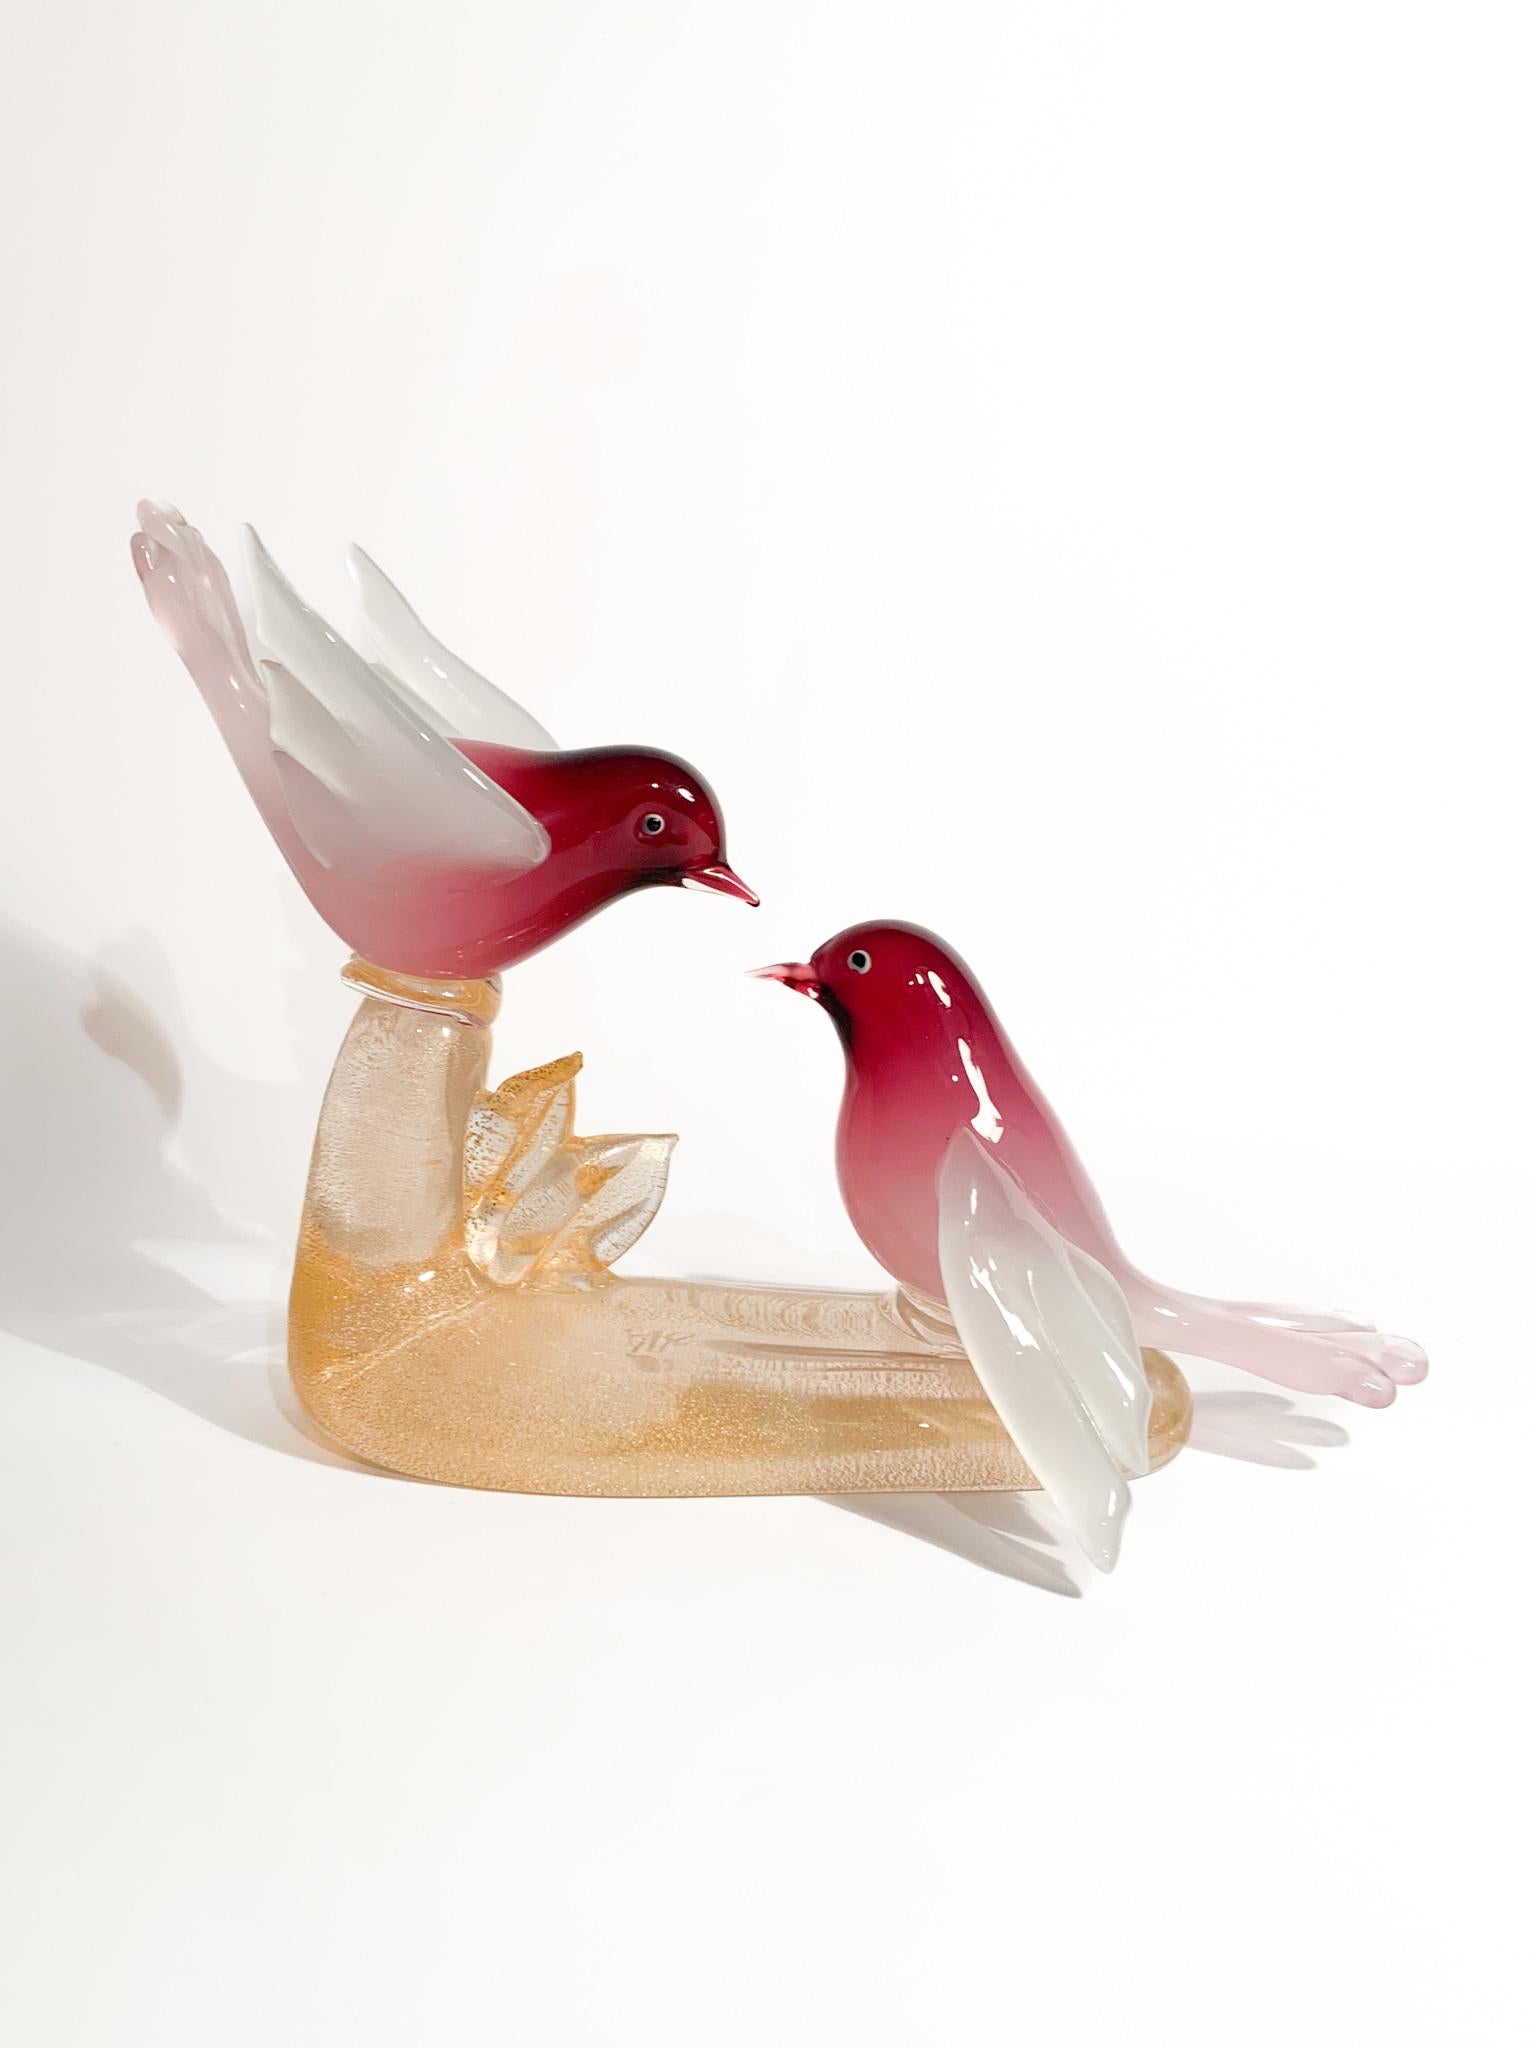 Sculpture of a pair of birds in Murano glass with gold leaf, created by ARS Cenedese in the 1960s

Ø 26 cm Ø 16 cm h 21 cm